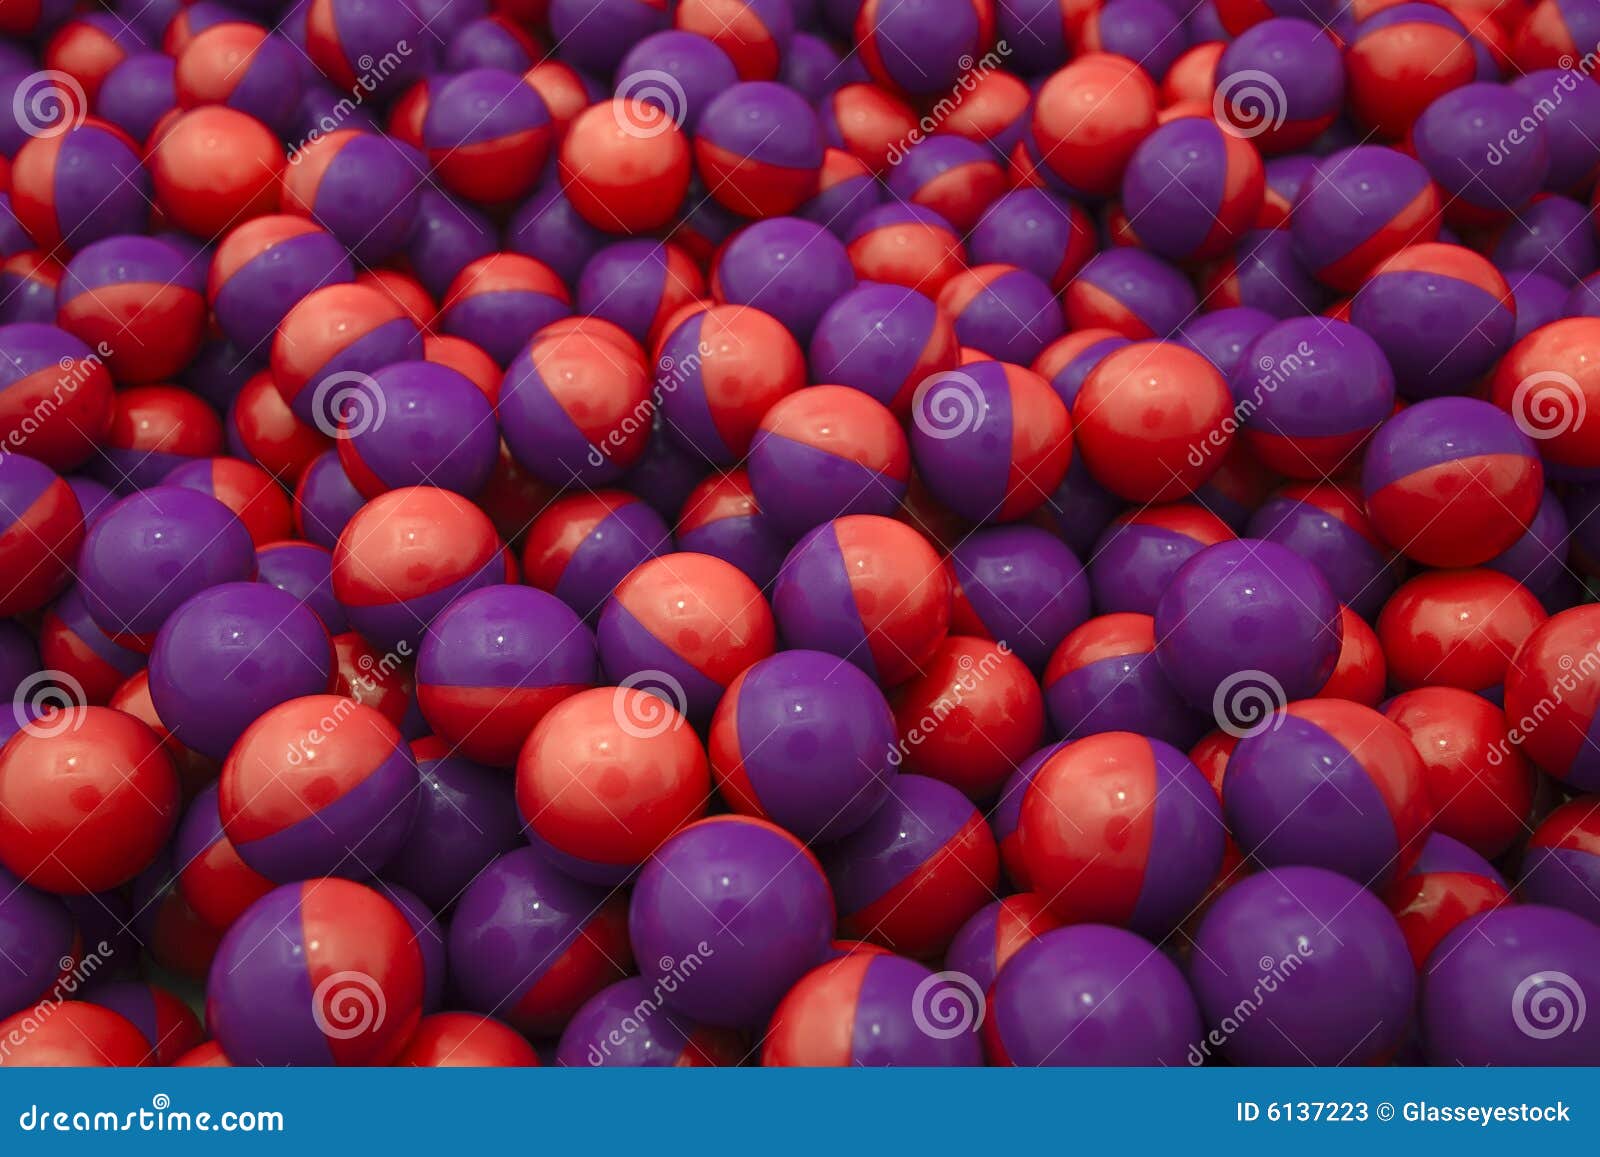 Download Red & purple paintballs stock image. Image of colour ...